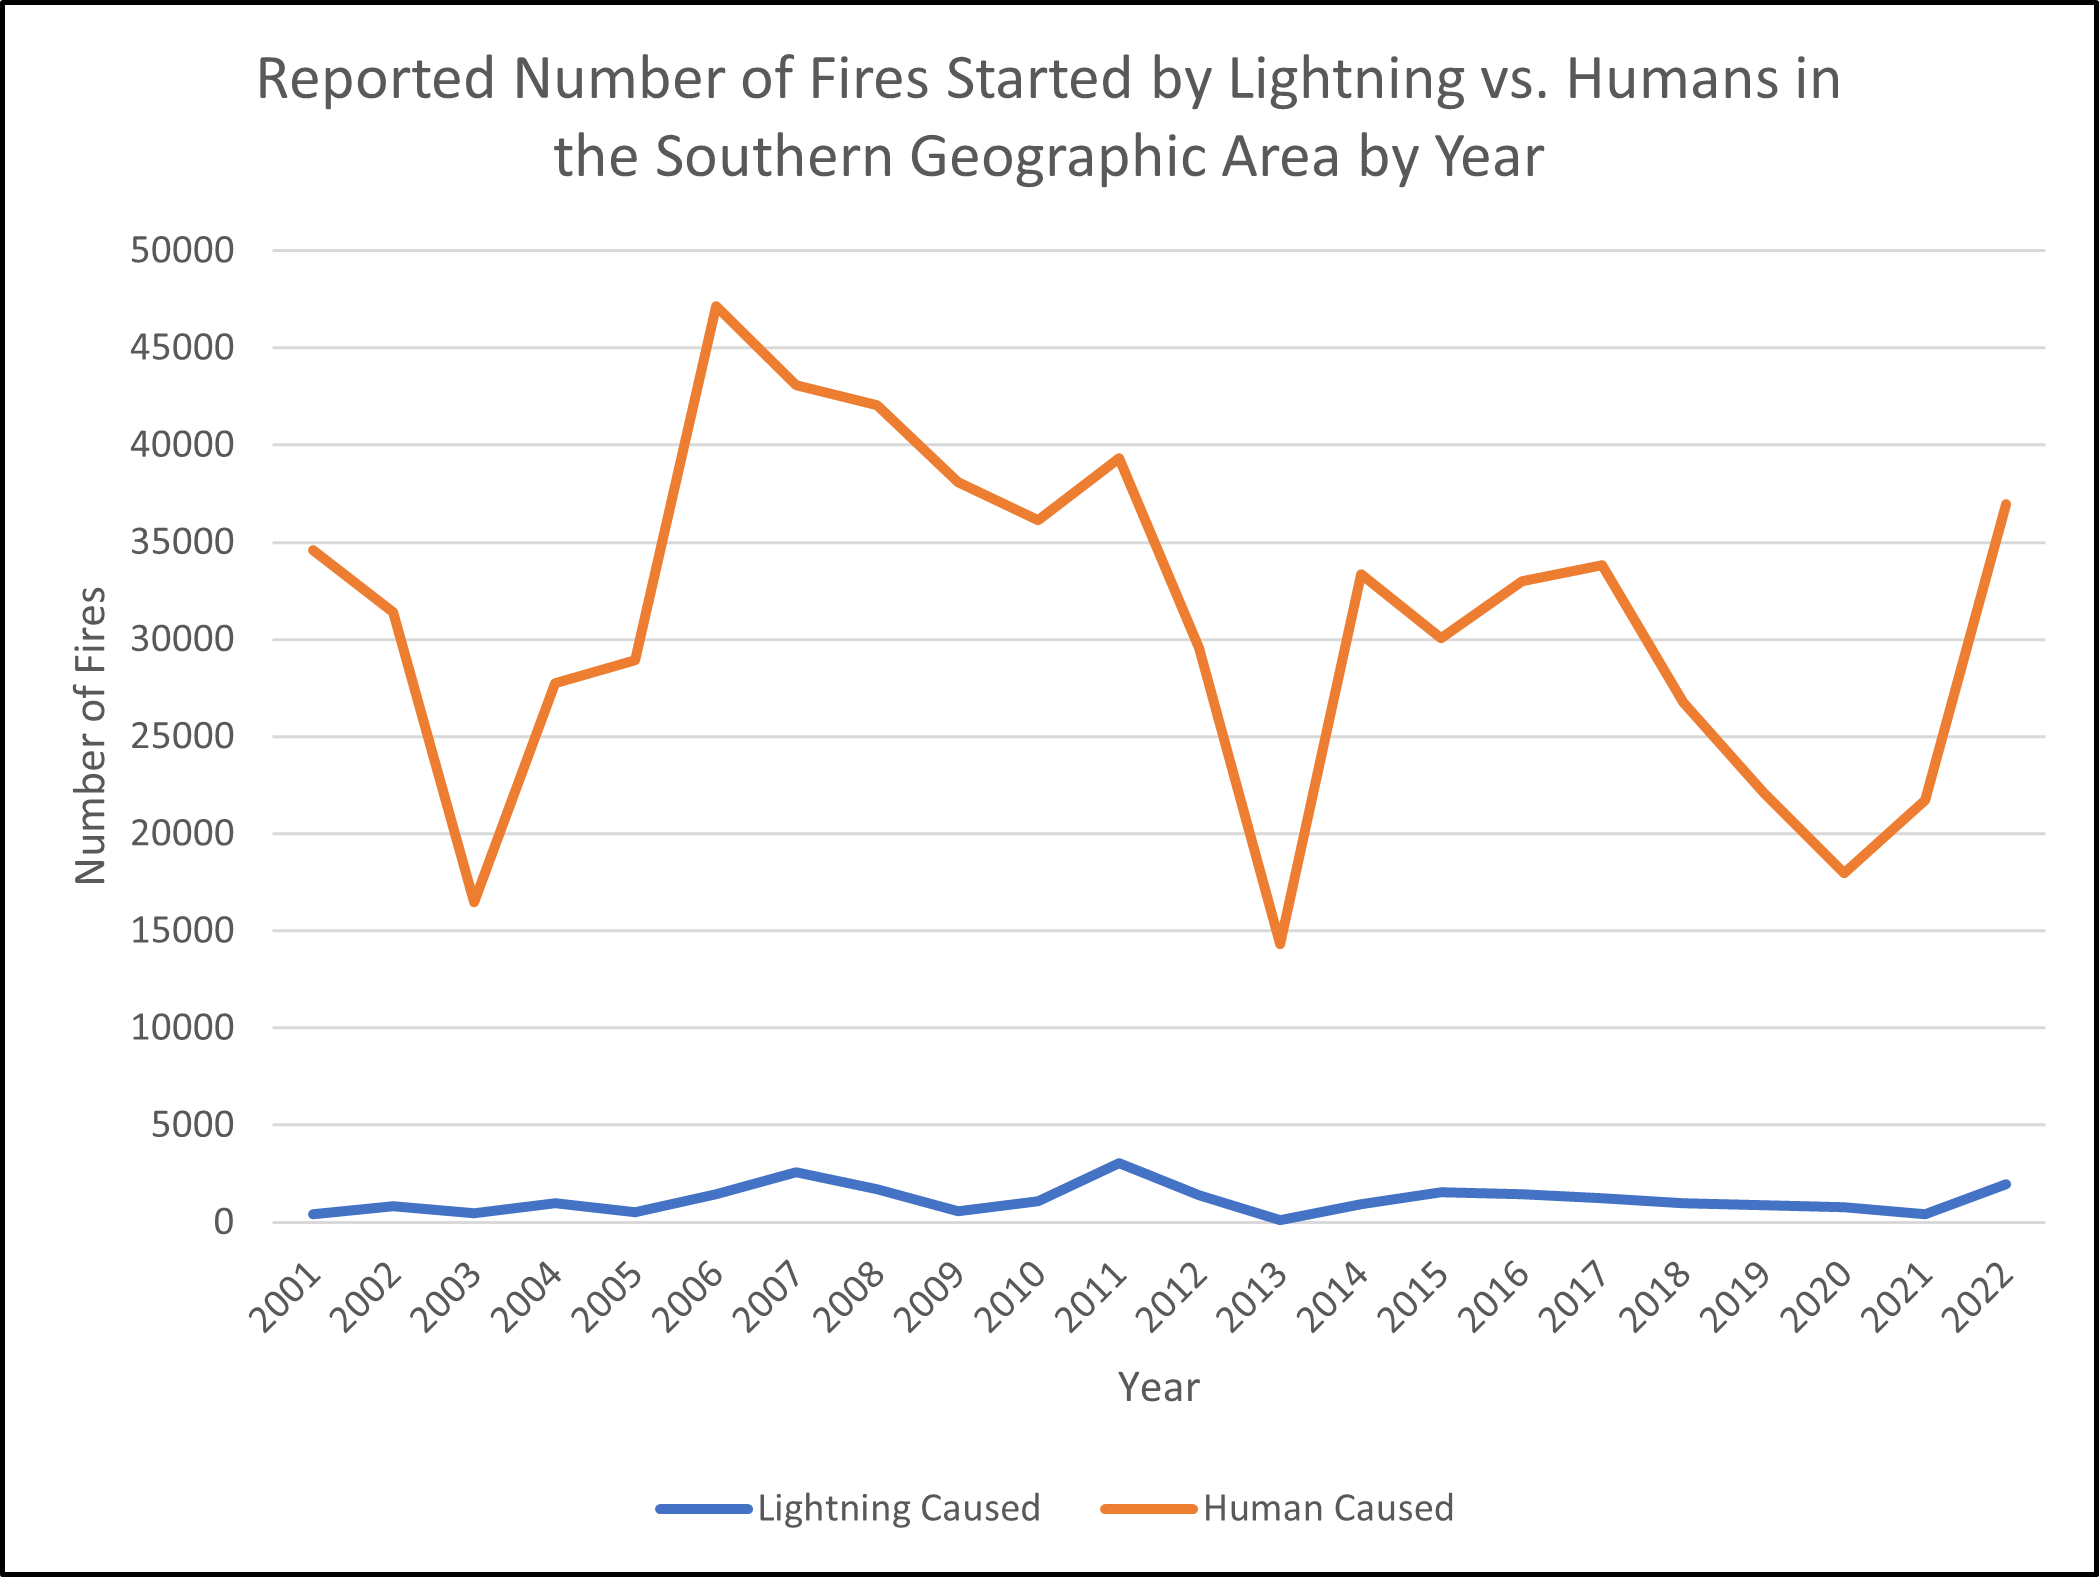 Graph showing reported wildfires started by lightning vs humans in the Southern geographic area between 2001 and 2022. Humans started more fires every year compared to lightning fires.